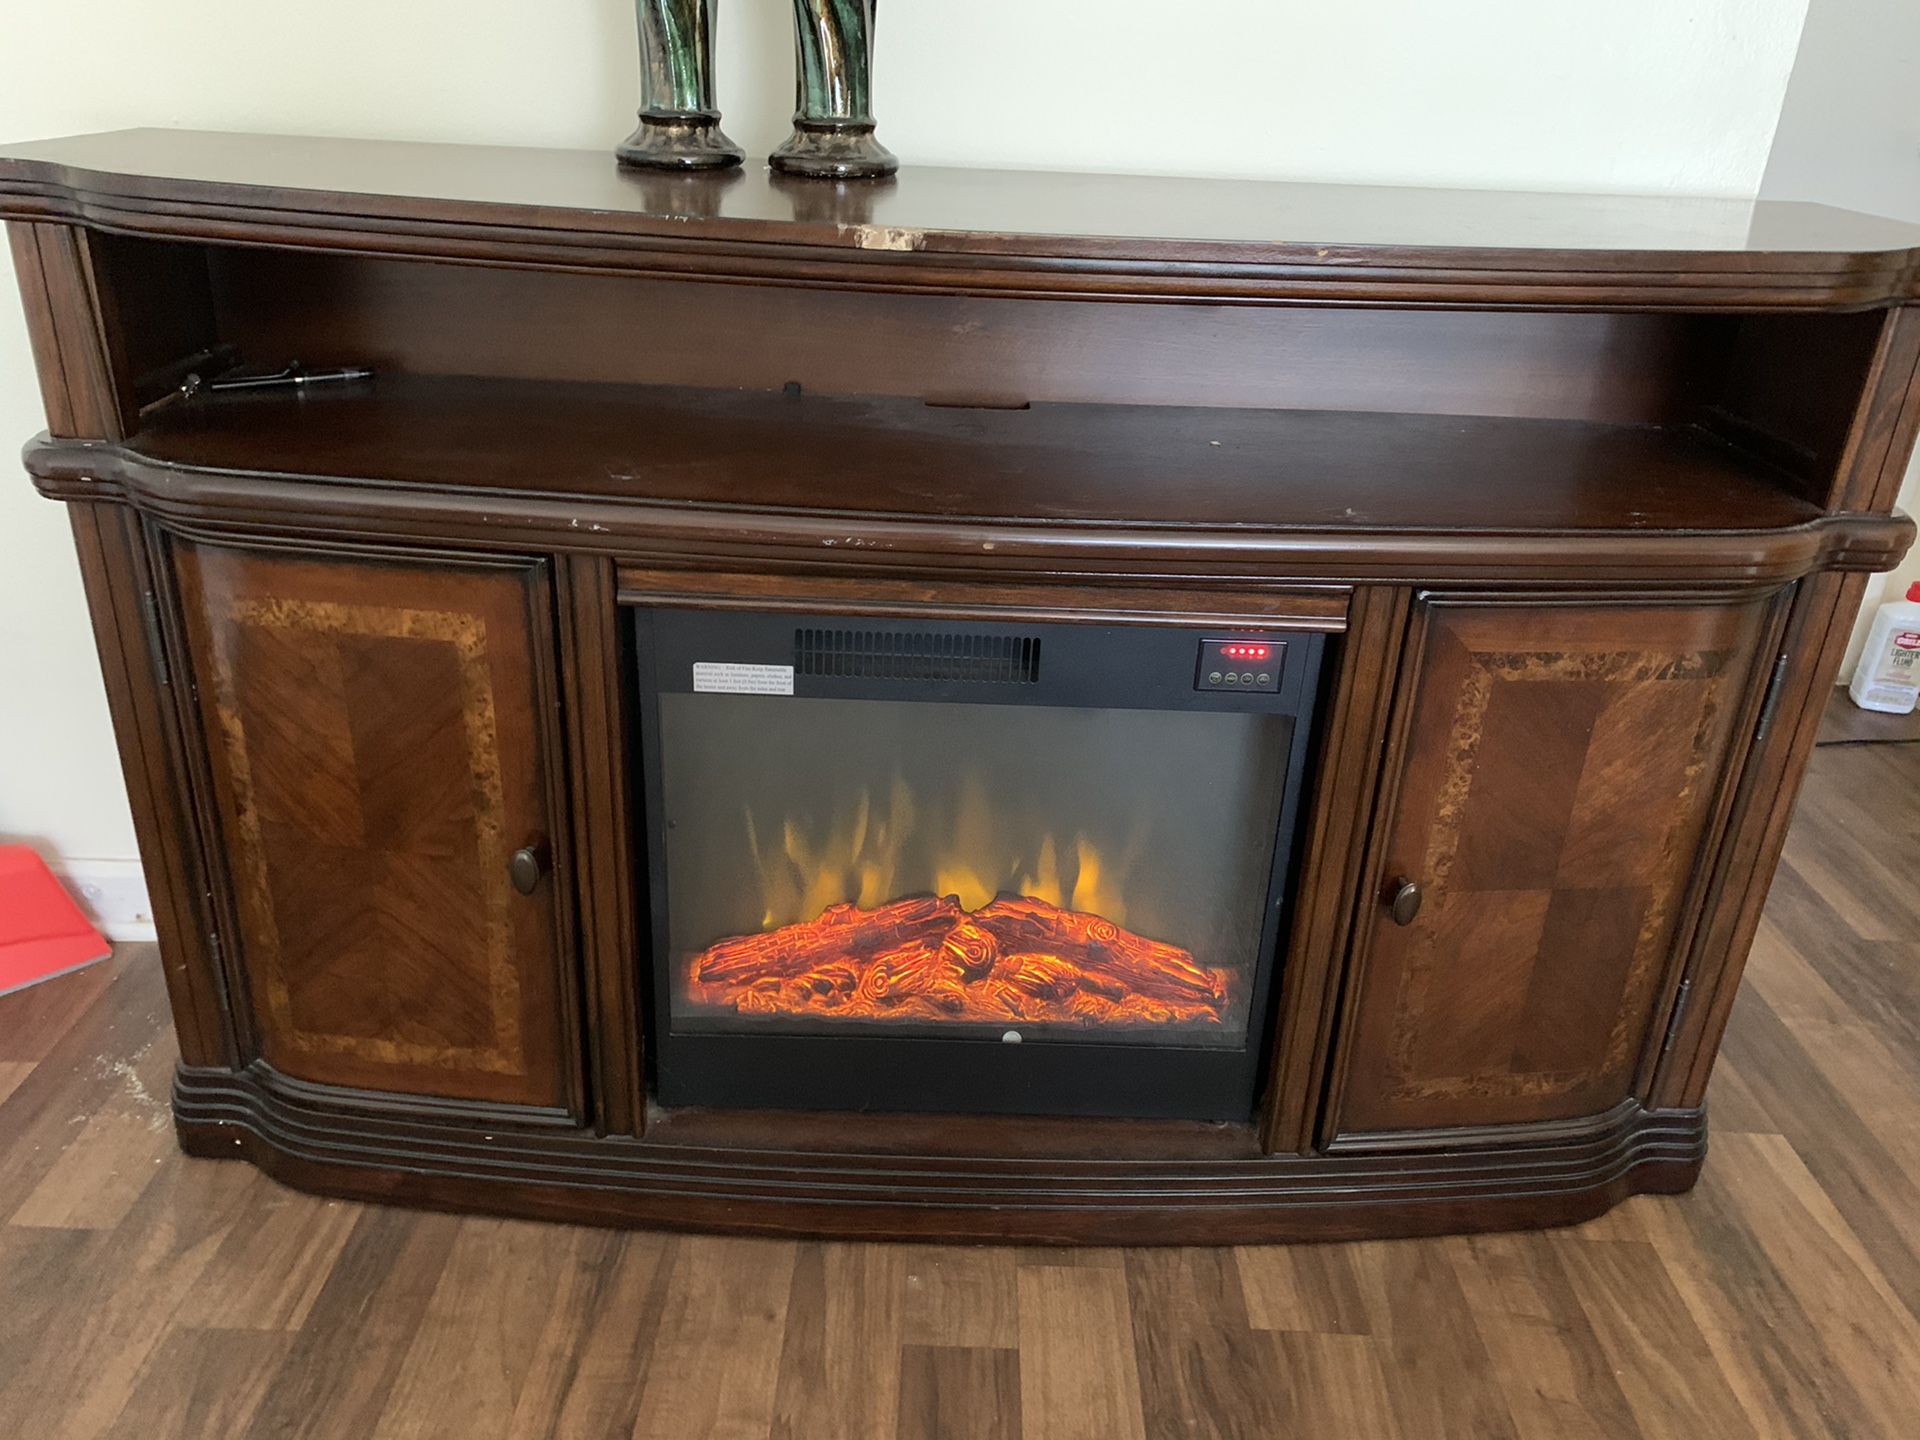 Electric Fireplace/Tv stand 72 inch Real wood not press wood very heavy and sturdy. Can heat an entire room easily